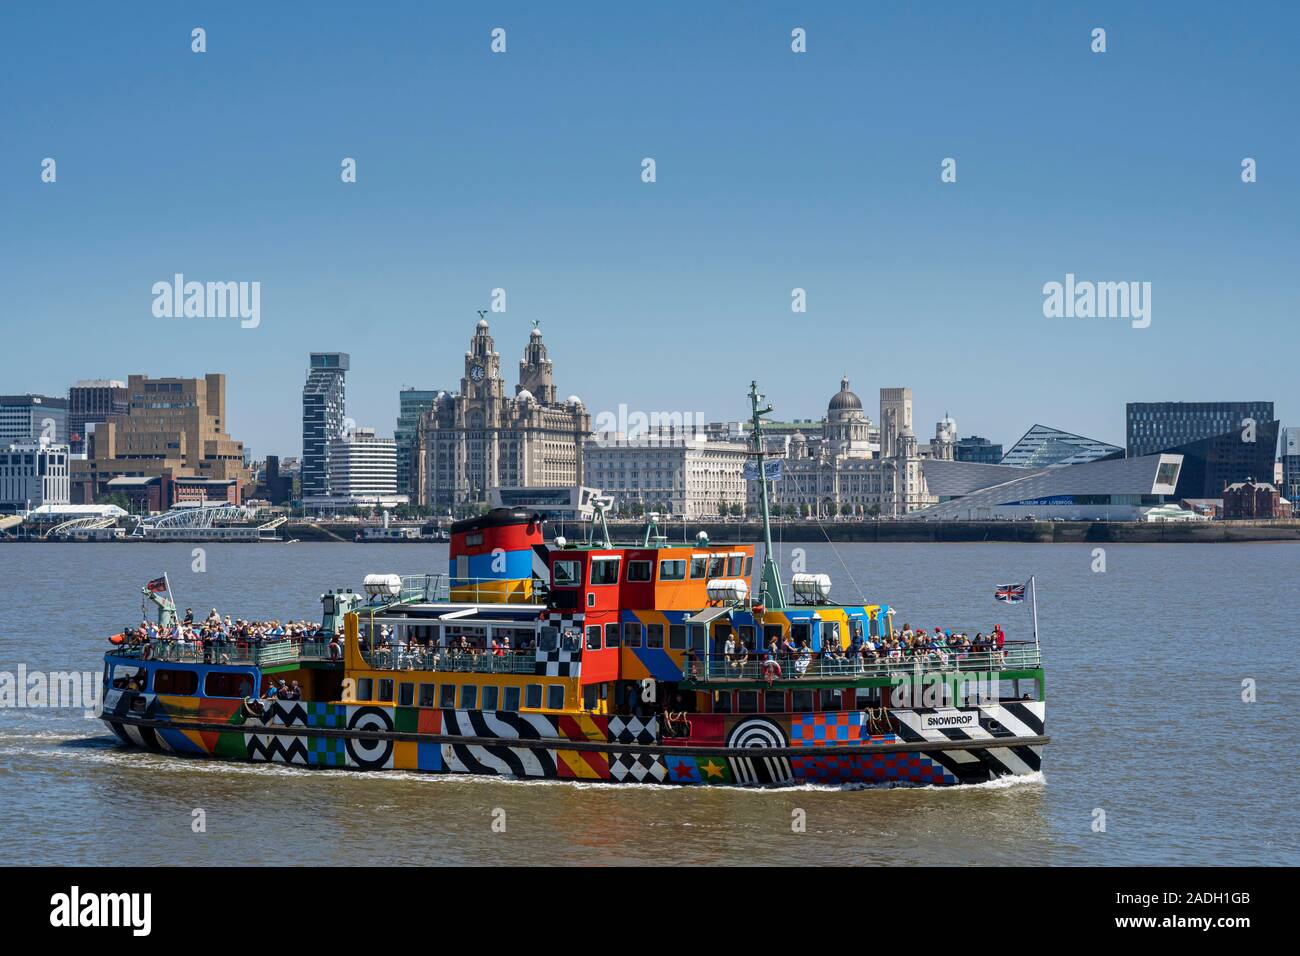 Mersey 'Dazzle' Ferry crossing the River Mersey from Birkenhead back to Liverpool, Merseyside, England Stock Photo